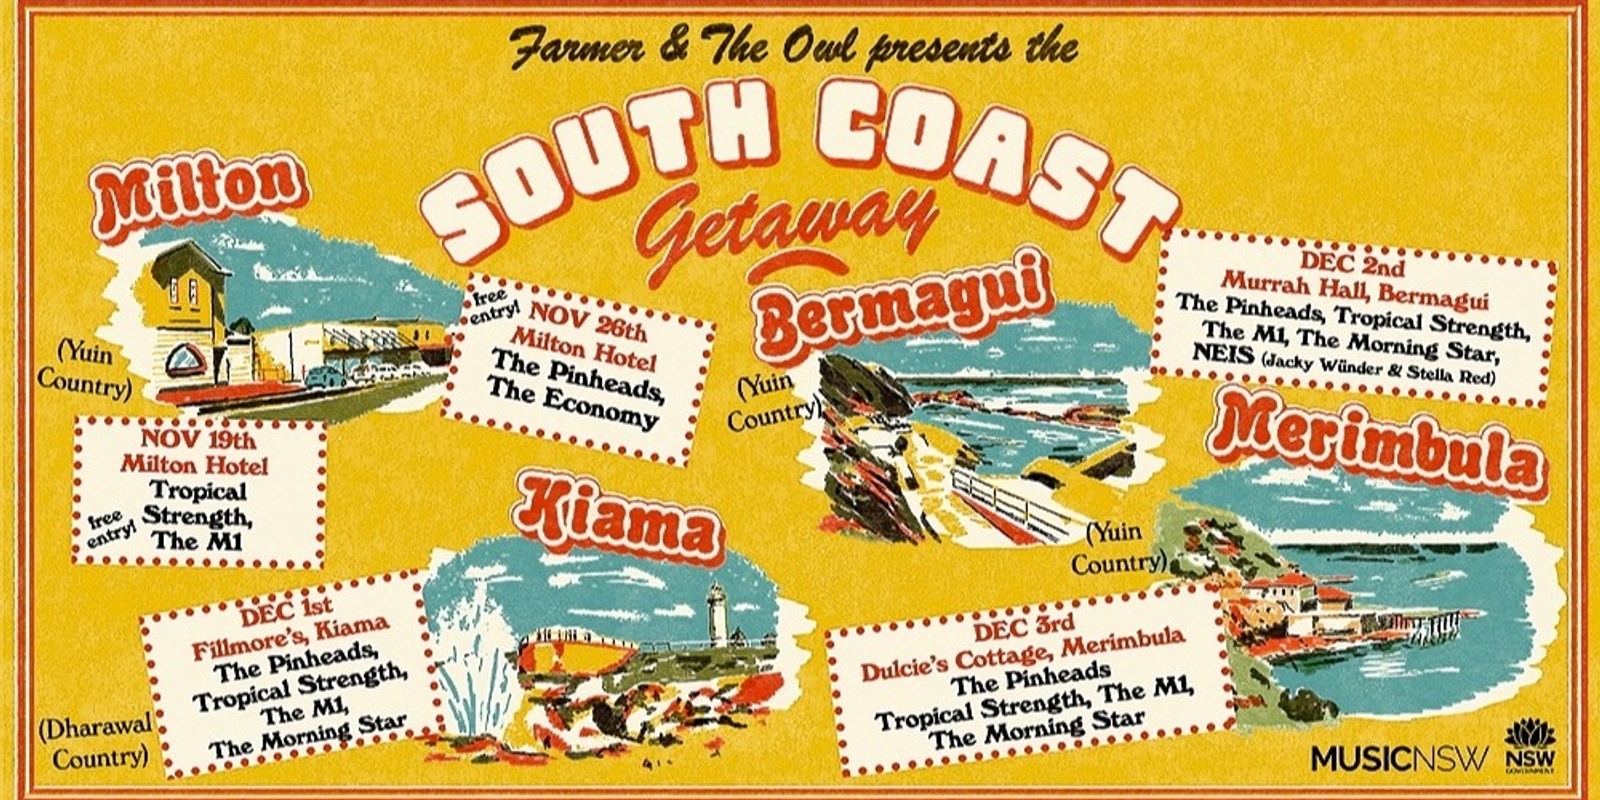 Banner image for South Coast Getaway Tour - MURRAH HALL, BERMAGUI ft. The Pinheads, Tropical Strength, The M1, The Morning Star, NEIS